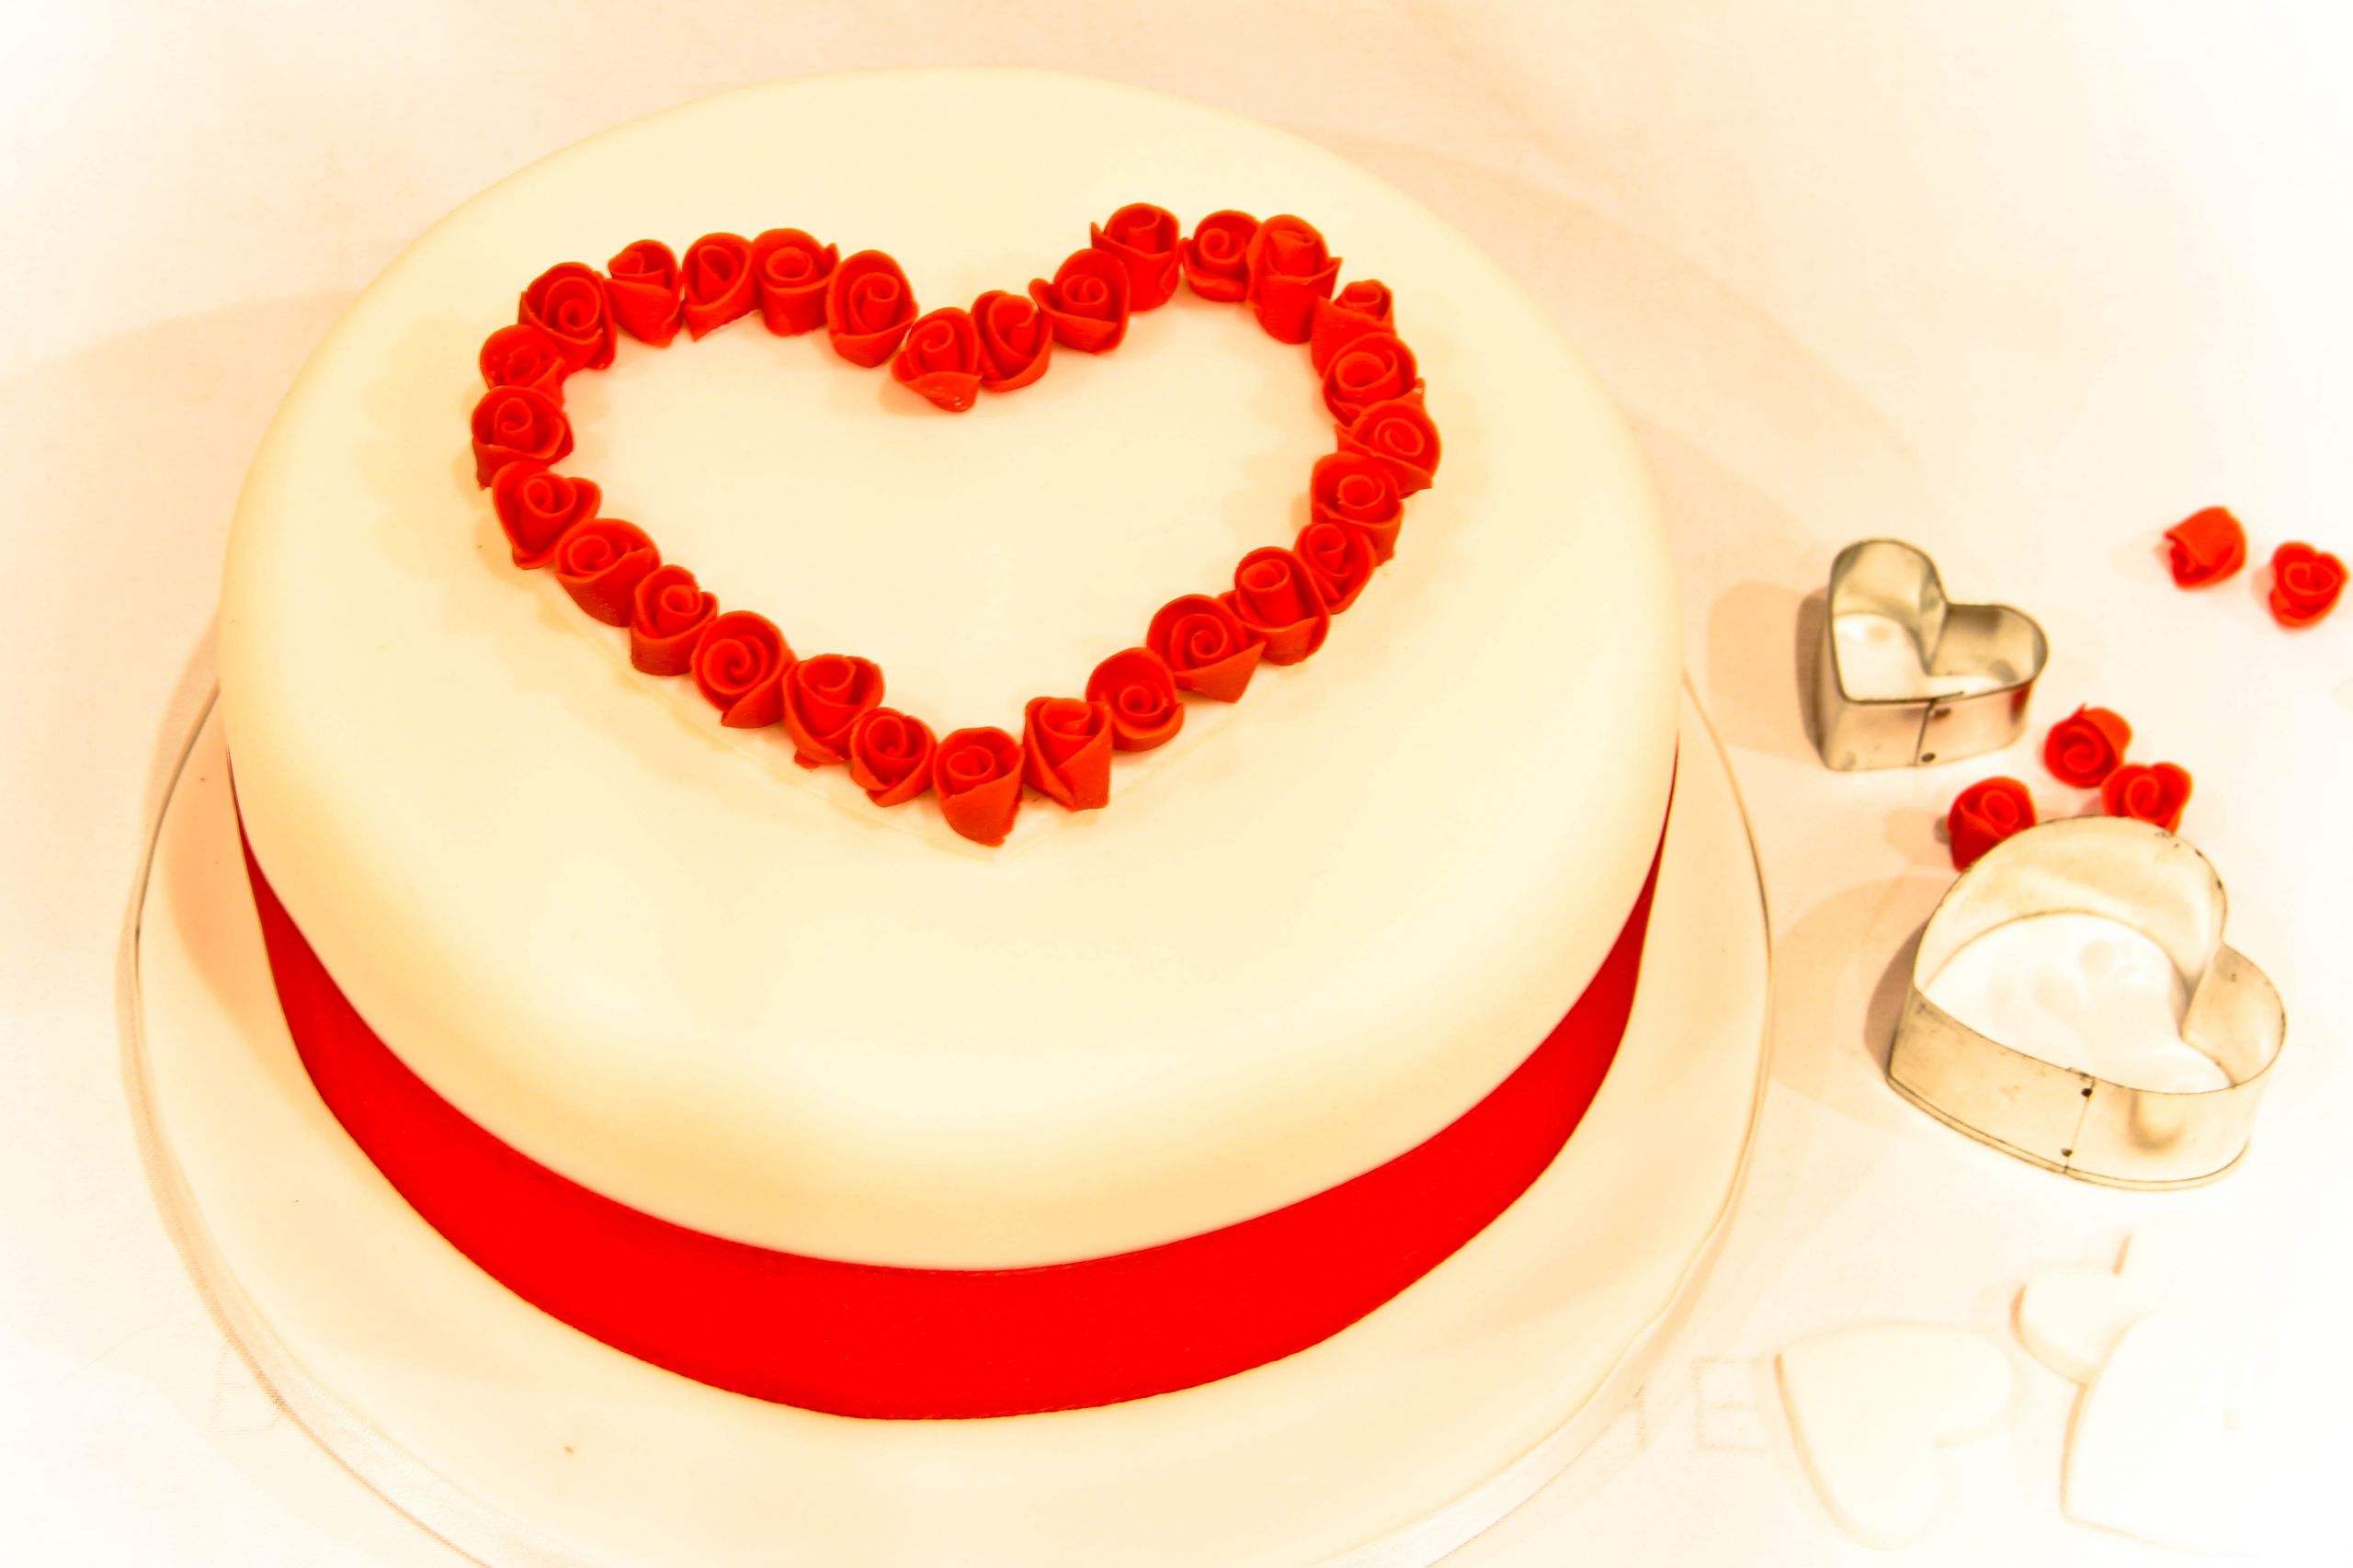 Valentines Day Cakes Pictures
 How to beat Valentine’s Day – Rachels Kitchen